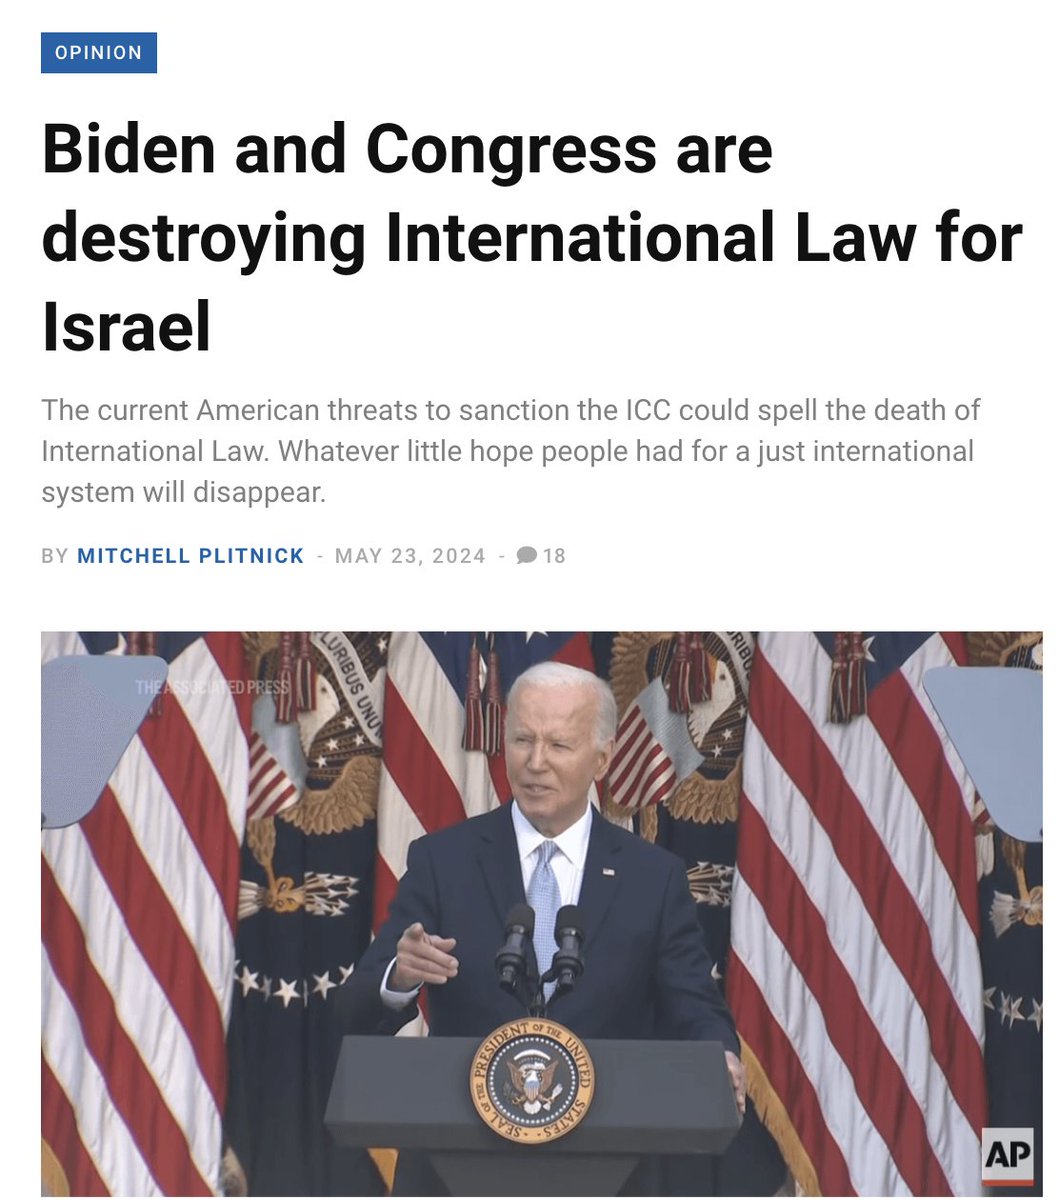 Biden went from 'we follow the rules' to 'the rules don't apply to us' the second the ICC called his bluff.